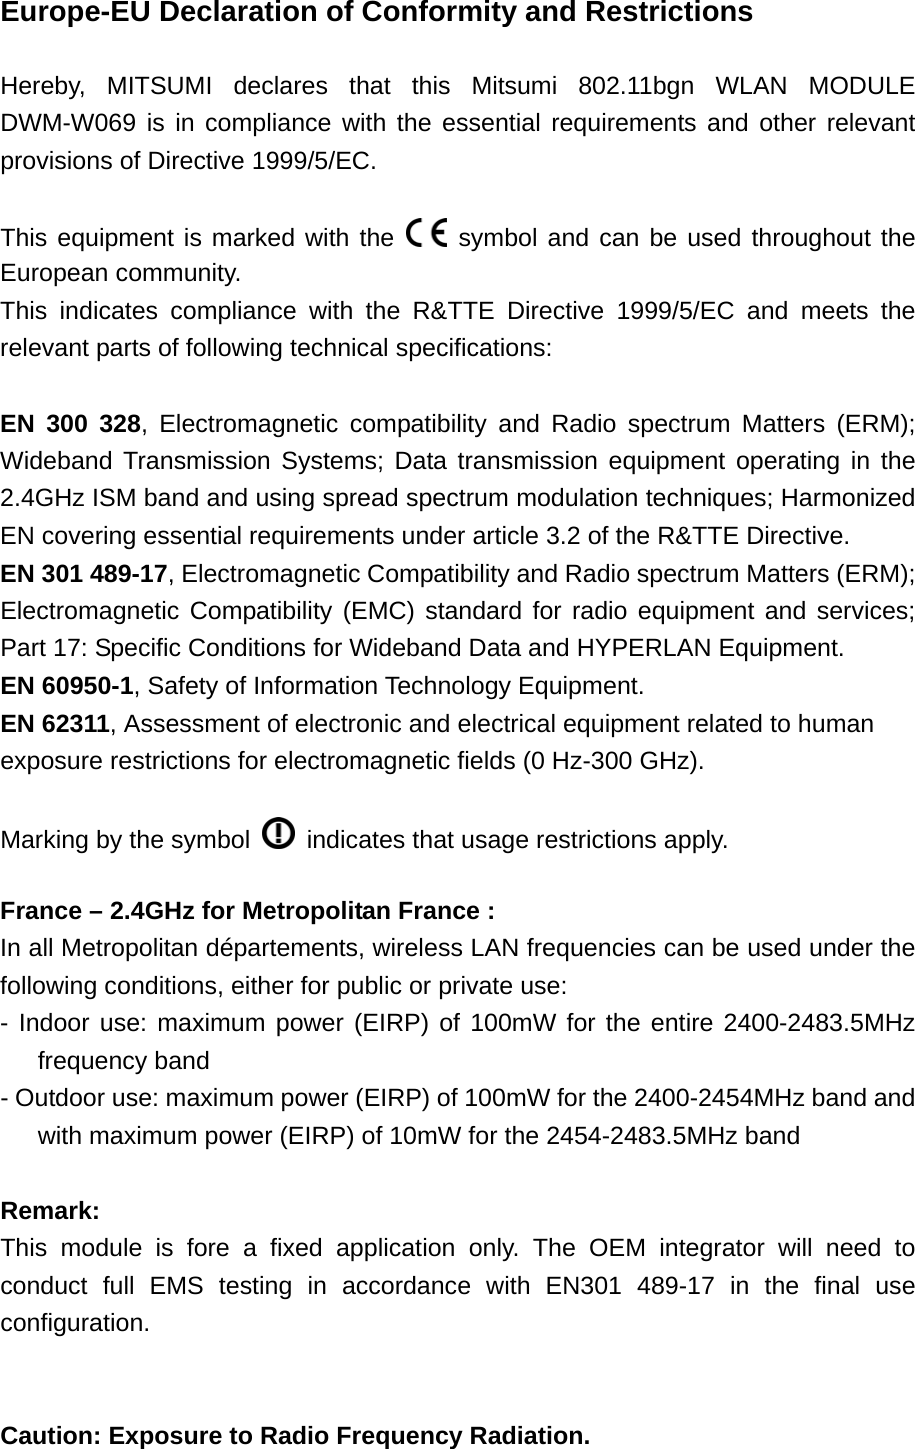 Europe-EU Declaration of Conformity and Restrictions  Hereby, MITSUMI declares that this Mitsumi 802.11bgn WLAN MODULE DWM-W069 is in compliance with the essential requirements and other relevant provisions of Directive 1999/5/EC.  This equipment is marked with the   symbol and can be used throughout the European community. This indicates compliance with the R&amp;TTE Directive 1999/5/EC and meets the relevant parts of following technical specifications:  EN 300 328, Electromagnetic compatibility and Radio spectrum Matters (ERM); Wideband Transmission Systems; Data transmission equipment operating in the 2.4GHz ISM band and using spread spectrum modulation techniques; Harmonized EN covering essential requirements under article 3.2 of the R&amp;TTE Directive. EN 301 489-17, Electromagnetic Compatibility and Radio spectrum Matters (ERM); Electromagnetic Compatibility (EMC) standard for radio equipment and services; Part 17: Specific Conditions for Wideband Data and HYPERLAN Equipment. EN 60950-1, Safety of Information Technology Equipment. EN 62311, Assessment of electronic and electrical equipment related to human exposure restrictions for electromagnetic fields (0 Hz-300 GHz).  Marking by the symbol    indicates that usage restrictions apply.  France – 2.4GHz for Metropolitan France : In all Metropolitan départements, wireless LAN frequencies can be used under the following conditions, either for public or private use: - Indoor use: maximum power (EIRP) of 100mW for the entire 2400-2483.5MHz frequency band - Outdoor use: maximum power (EIRP) of 100mW for the 2400-2454MHz band and with maximum power (EIRP) of 10mW for the 2454-2483.5MHz band  Remark:  This module is fore a fixed application only. The OEM integrator will need to conduct full EMS testing in accordance with EN301 489-17 in the final use configuration.   Caution: Exposure to Radio Frequency Radiation. 